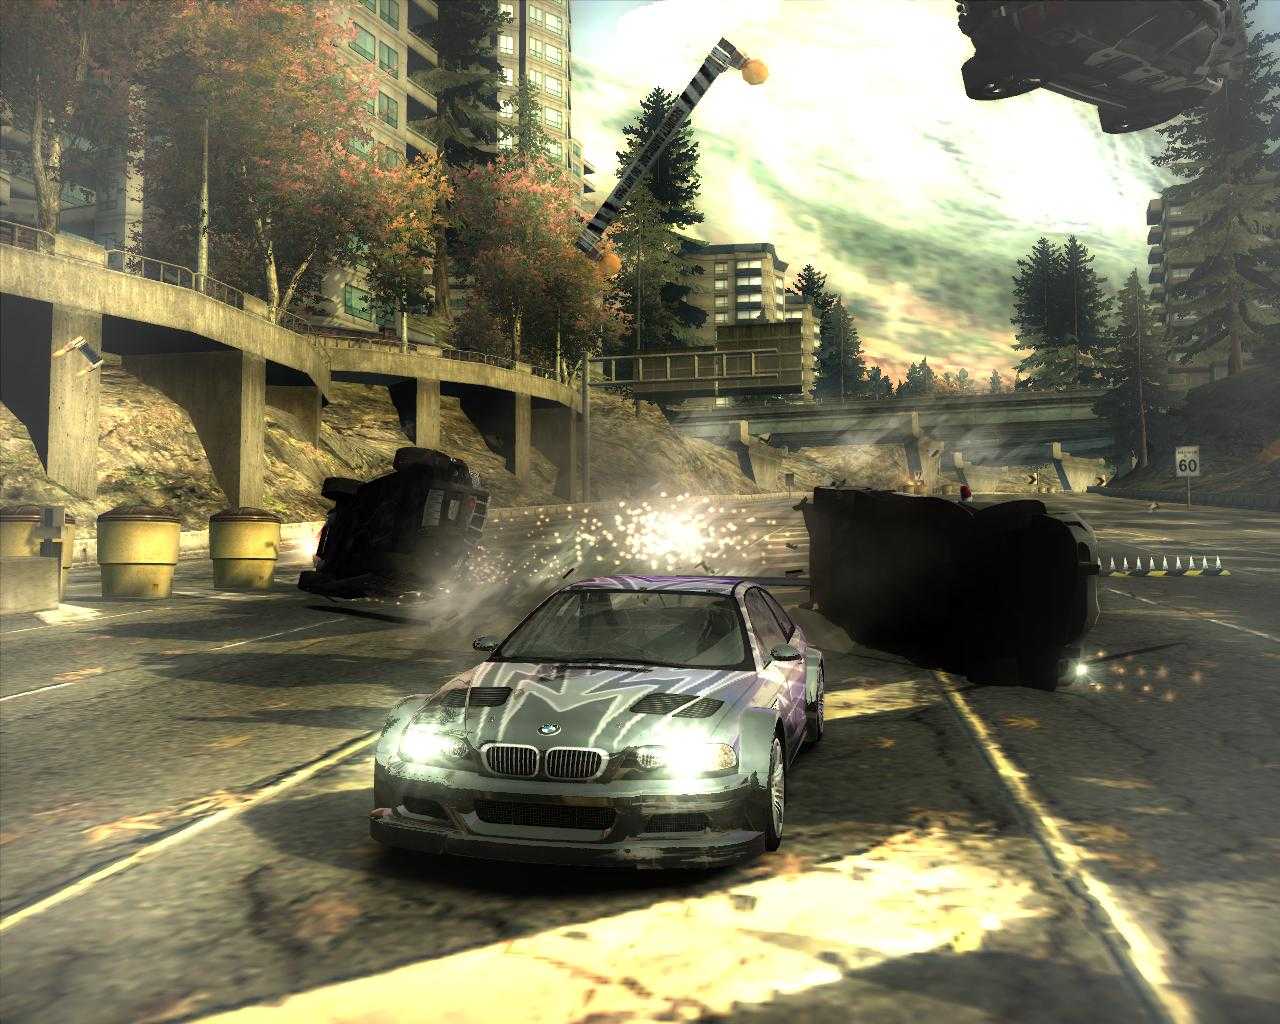 Игры nfs mw. Игра NFS most wanted 2005. Нфс мост вантед 2005. Гонки NFS most wanted 2005. NFS мост вантед 2005.